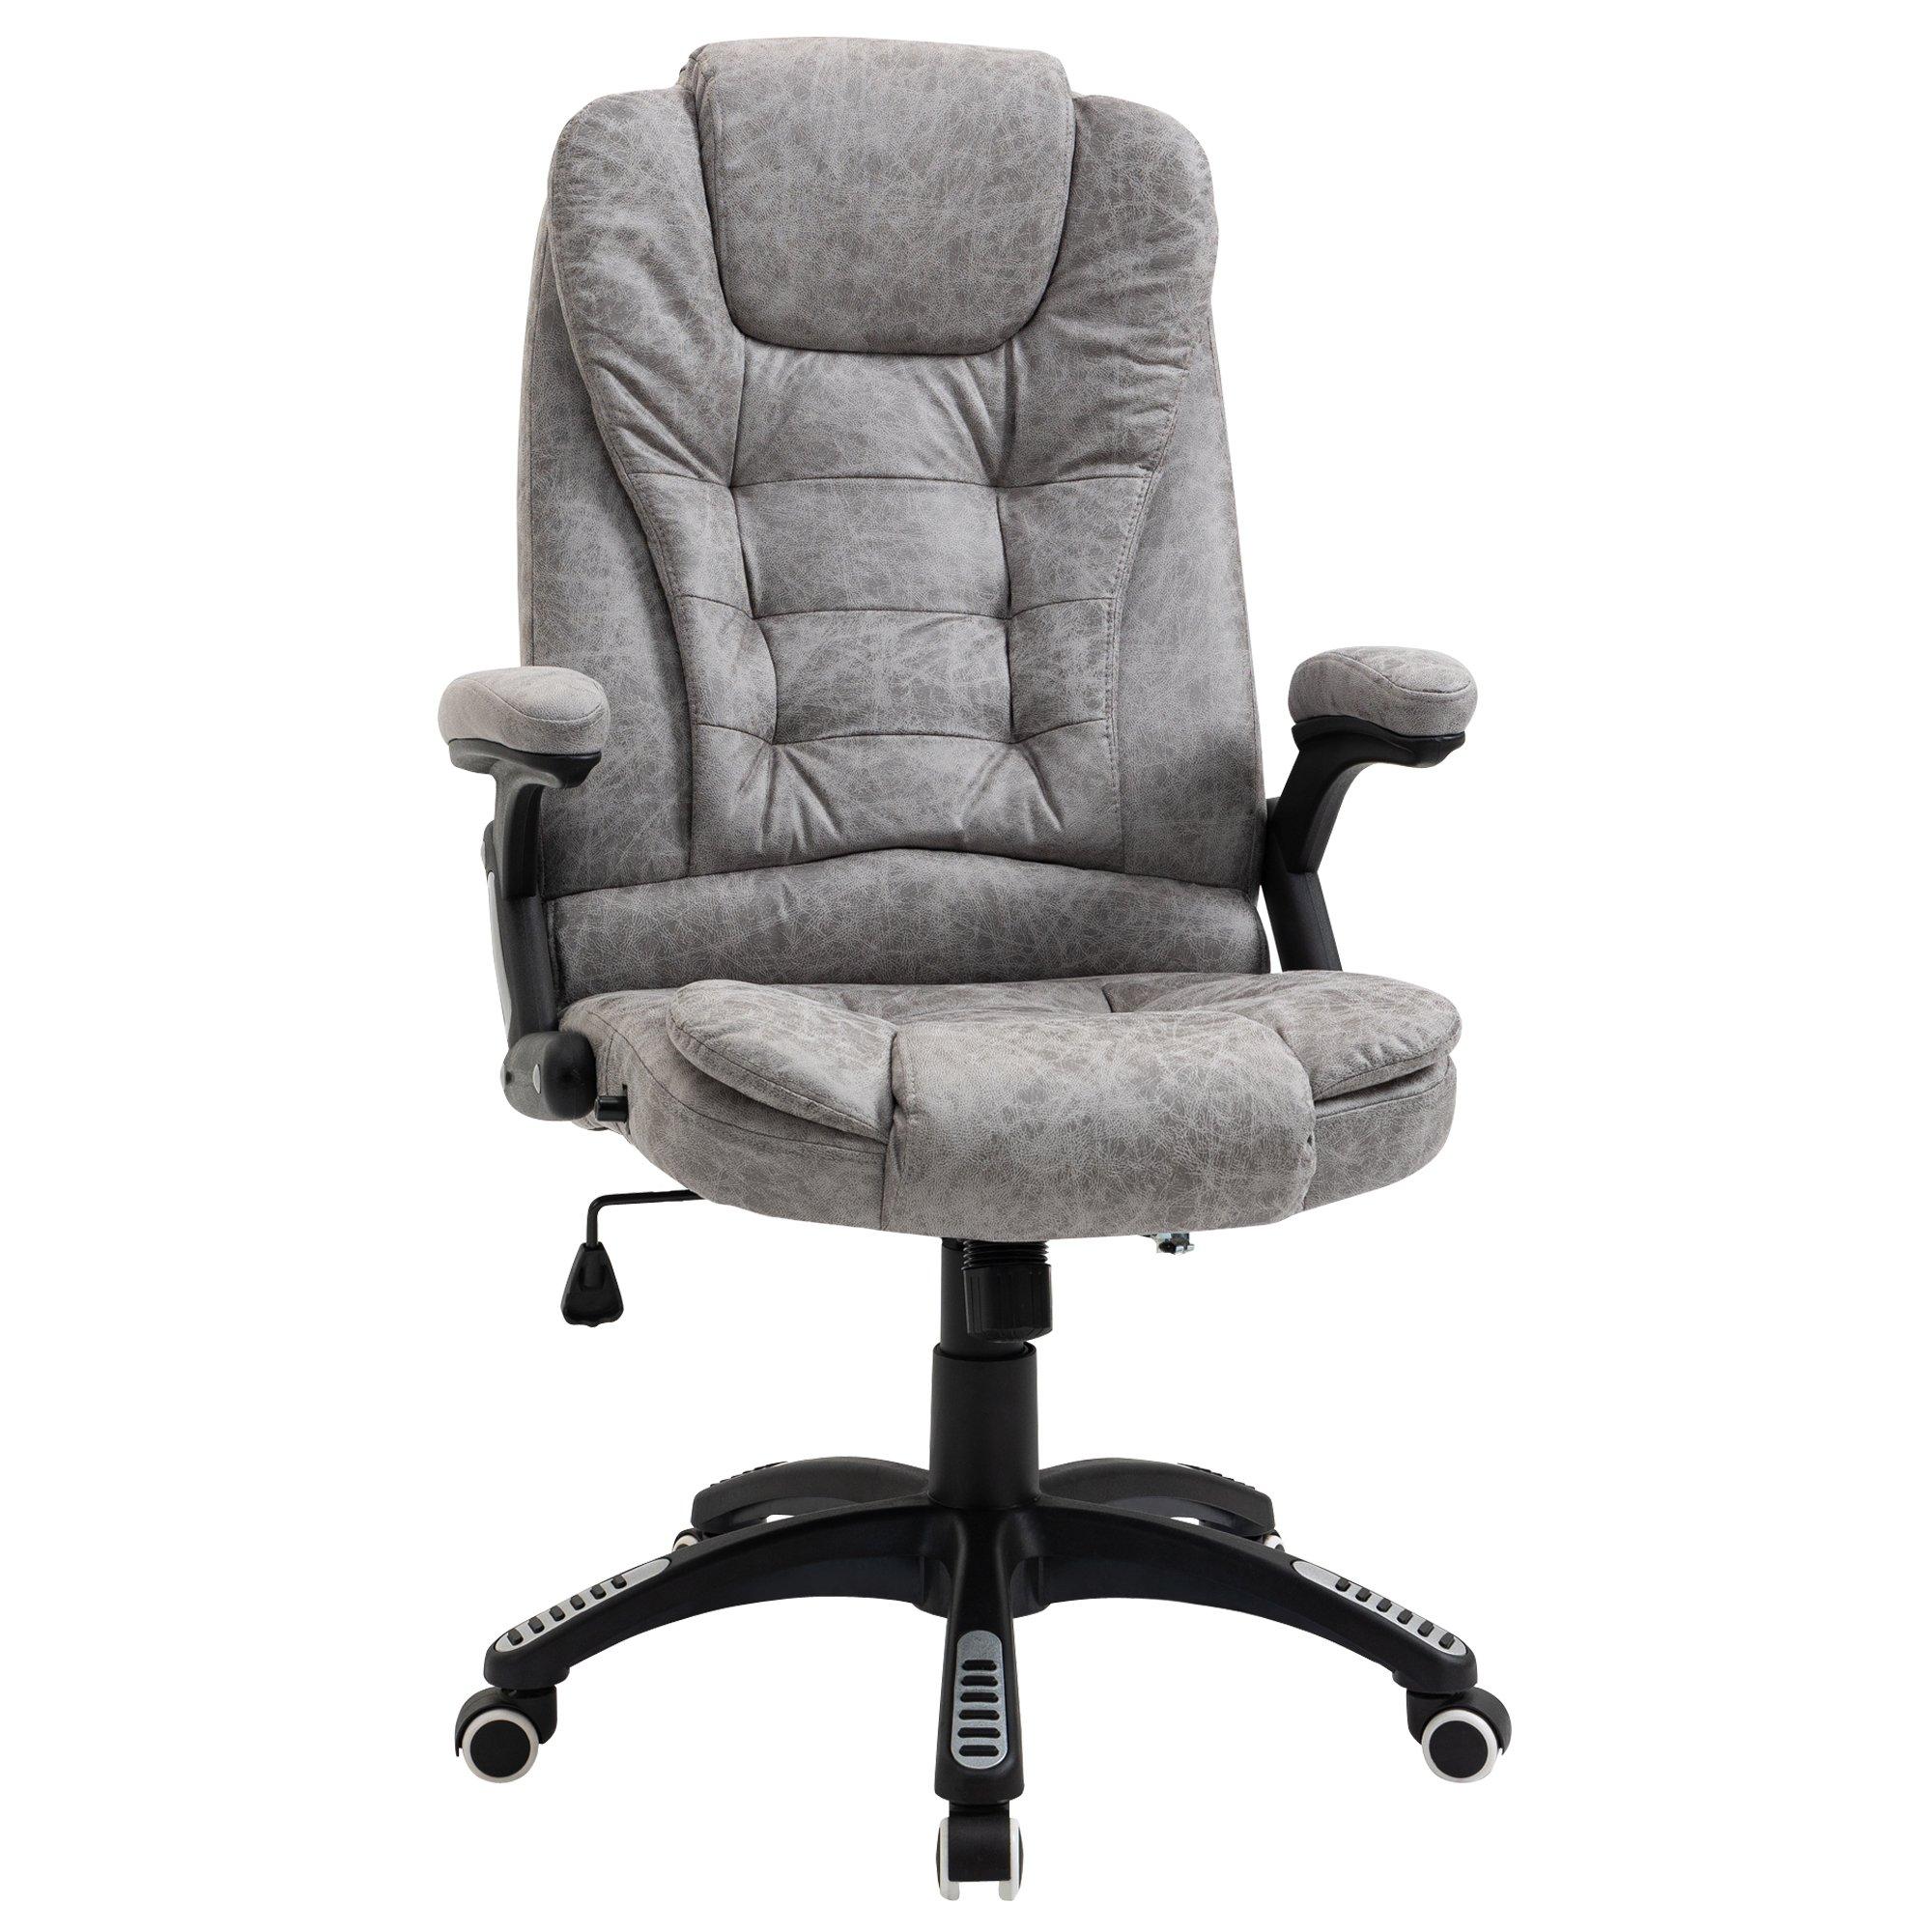 High Back Home Office Chair Computer Desk Chair with Arms Swivel Wheels